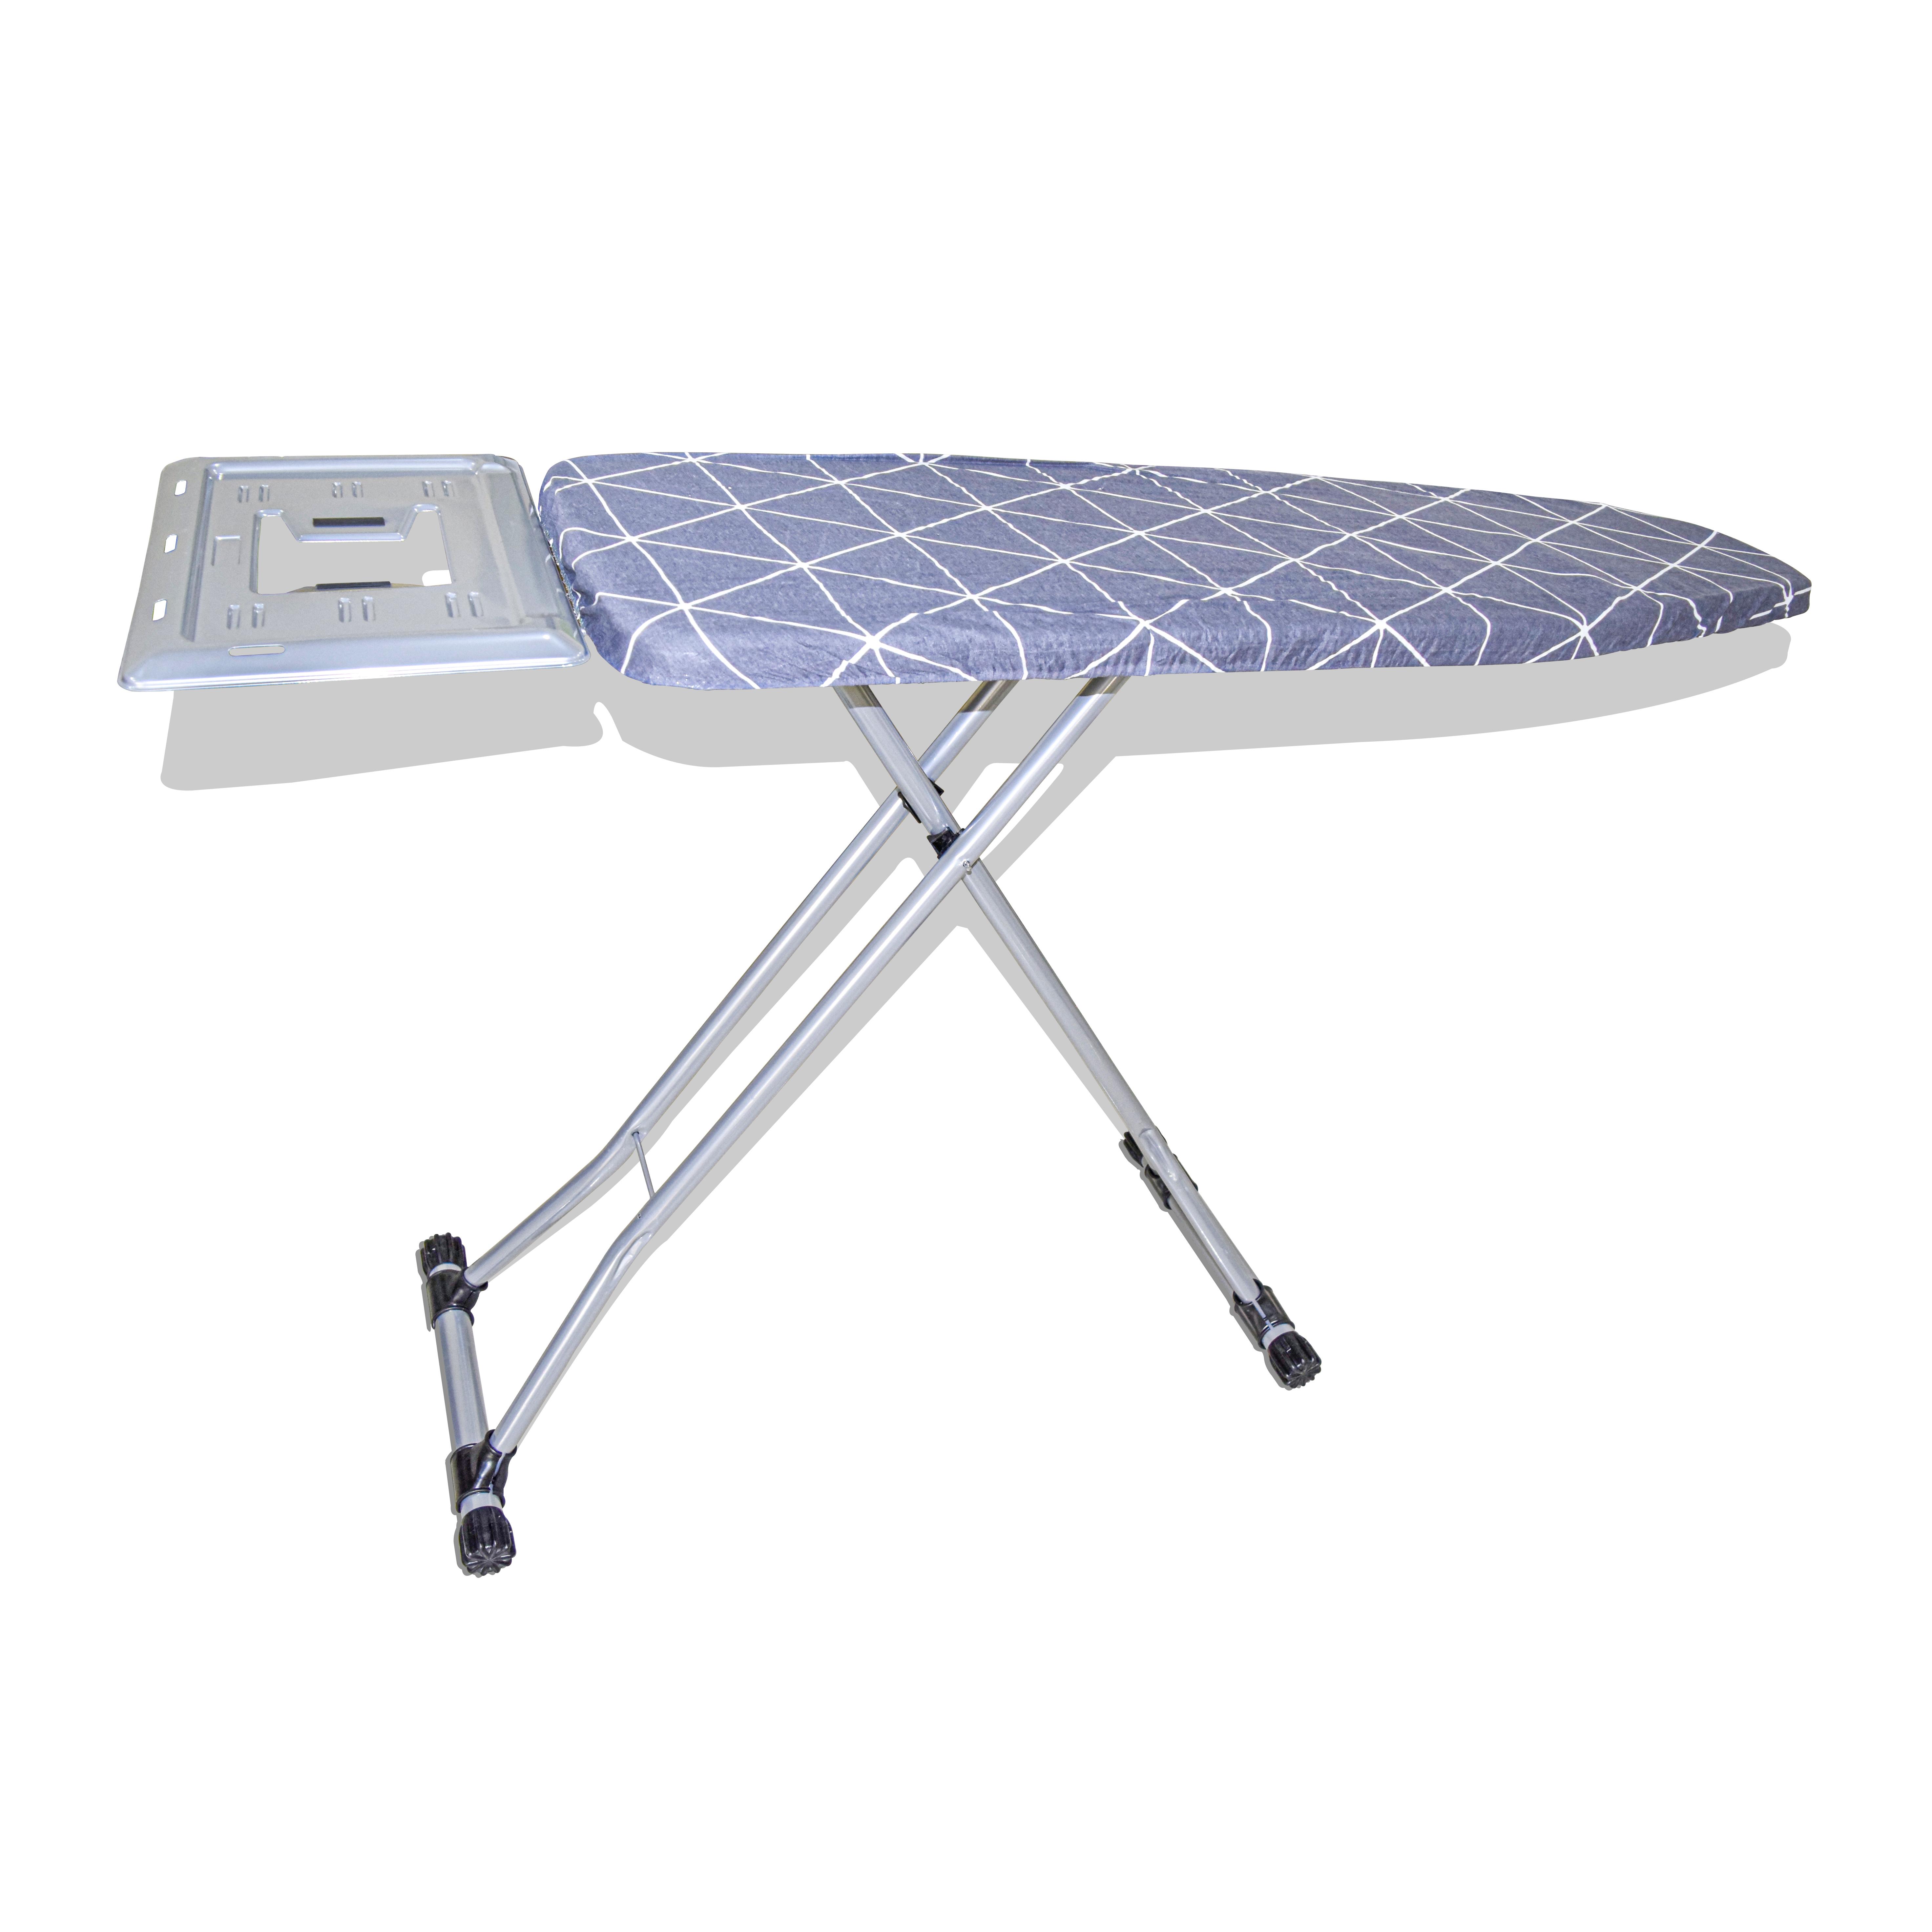 AKC |Stainless Steel Ironing Board 37 x 117